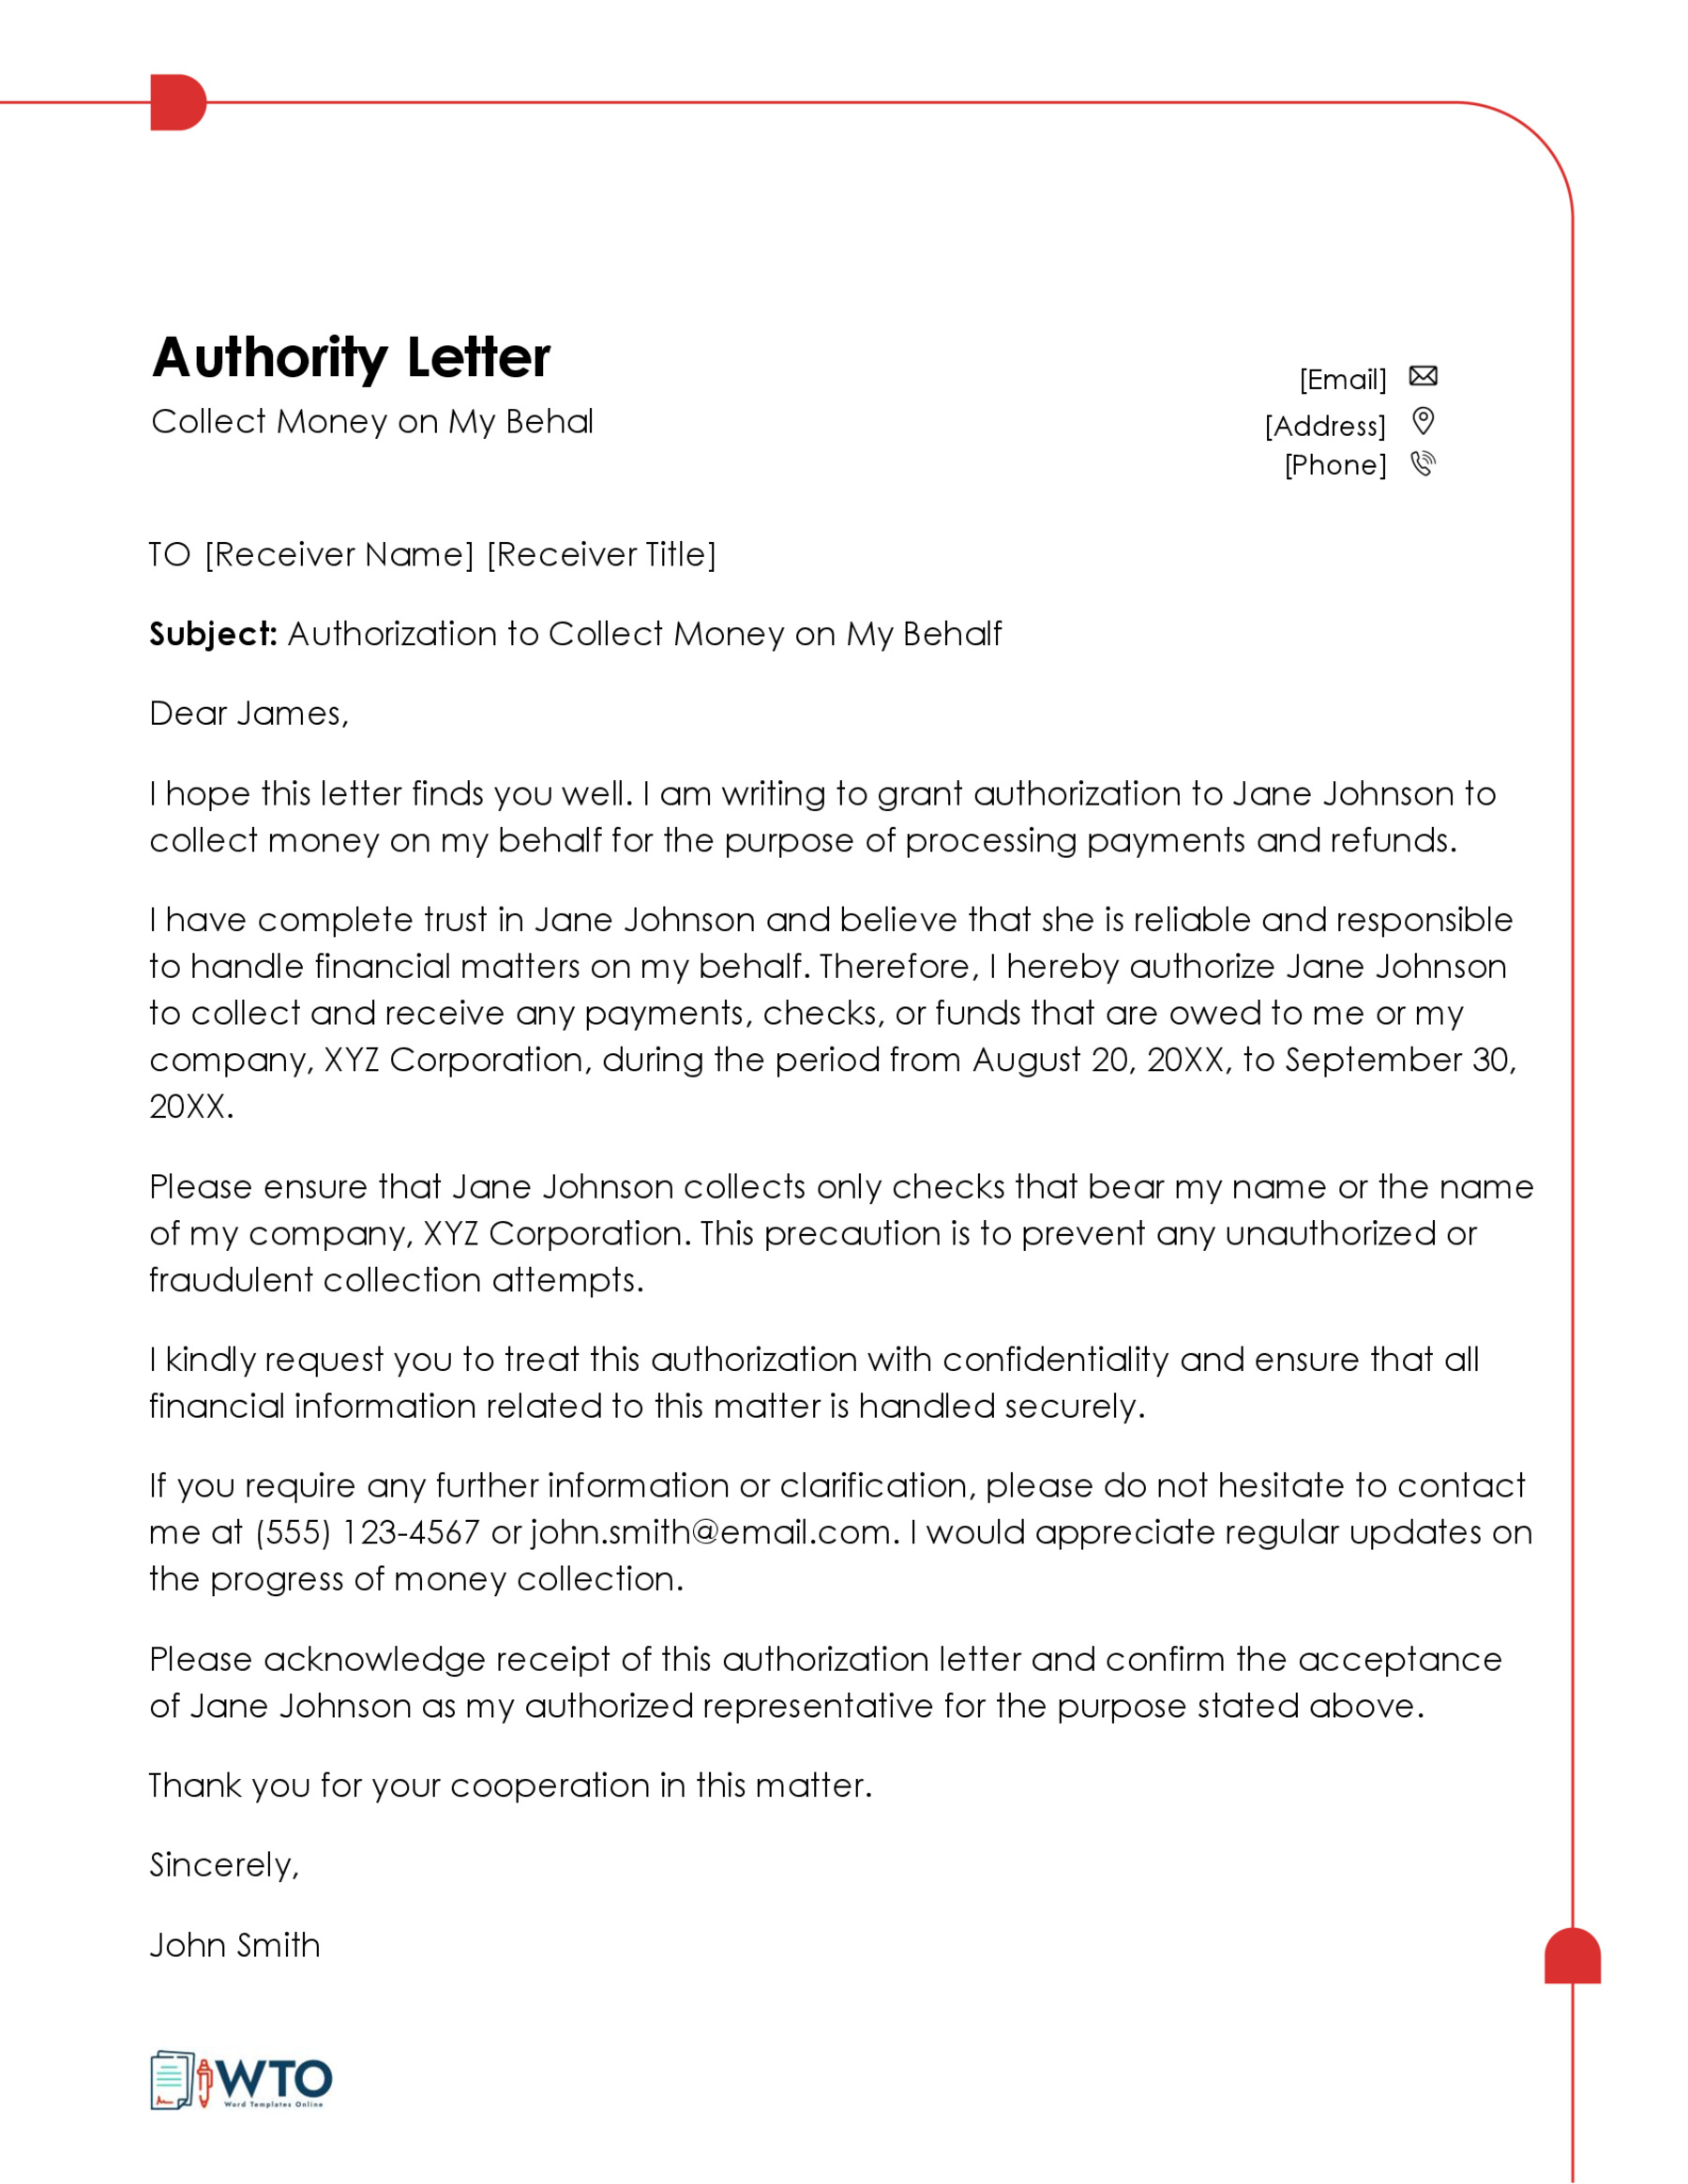 Authorization Letter to Collect Money